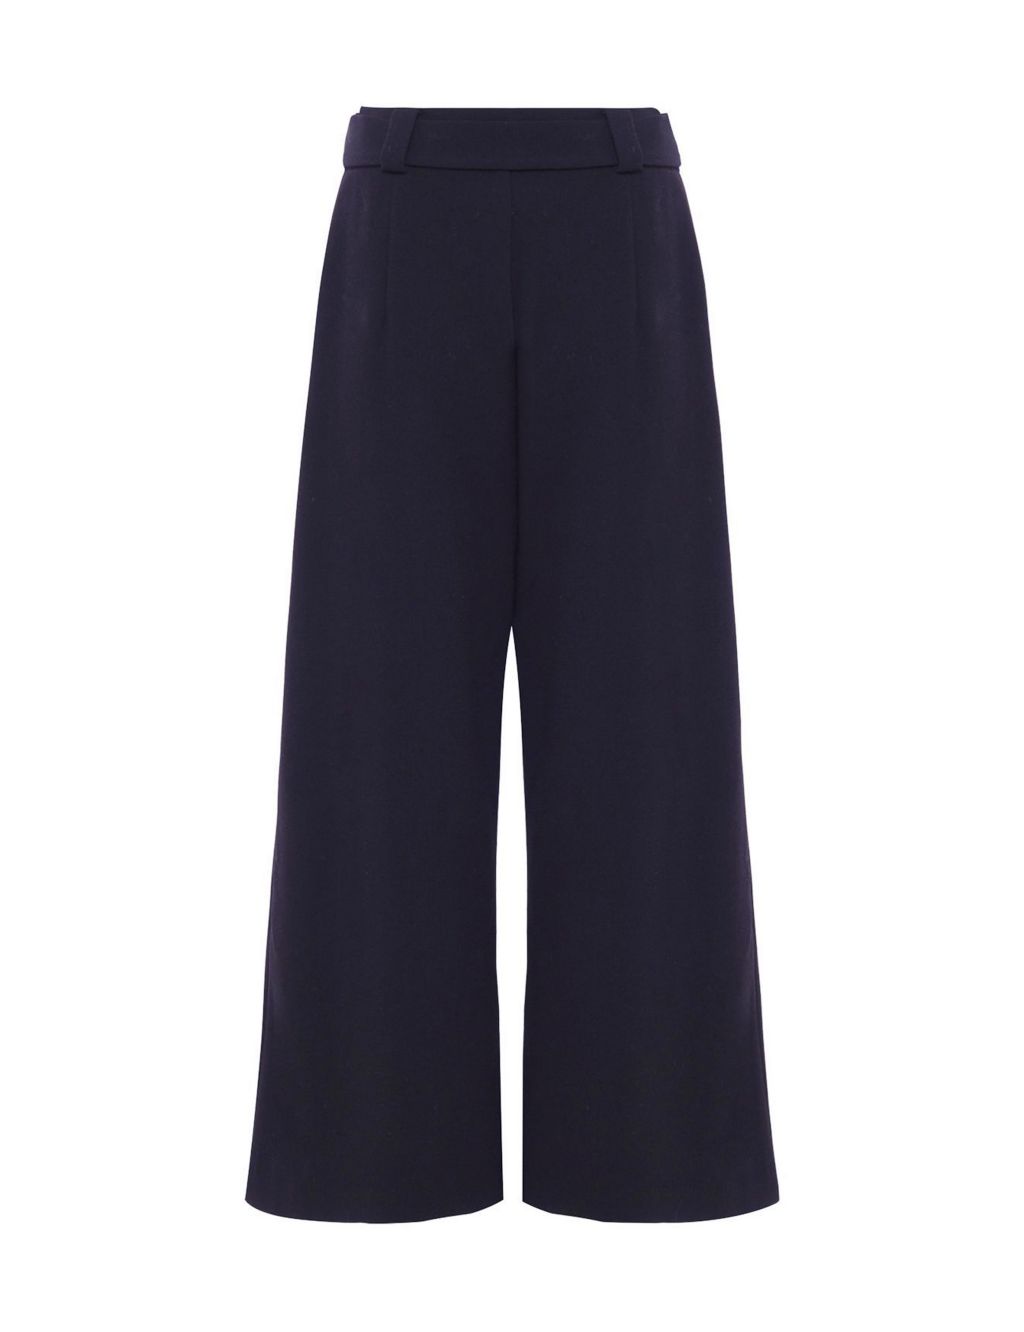 Belted Wide Leg Culottes image 2